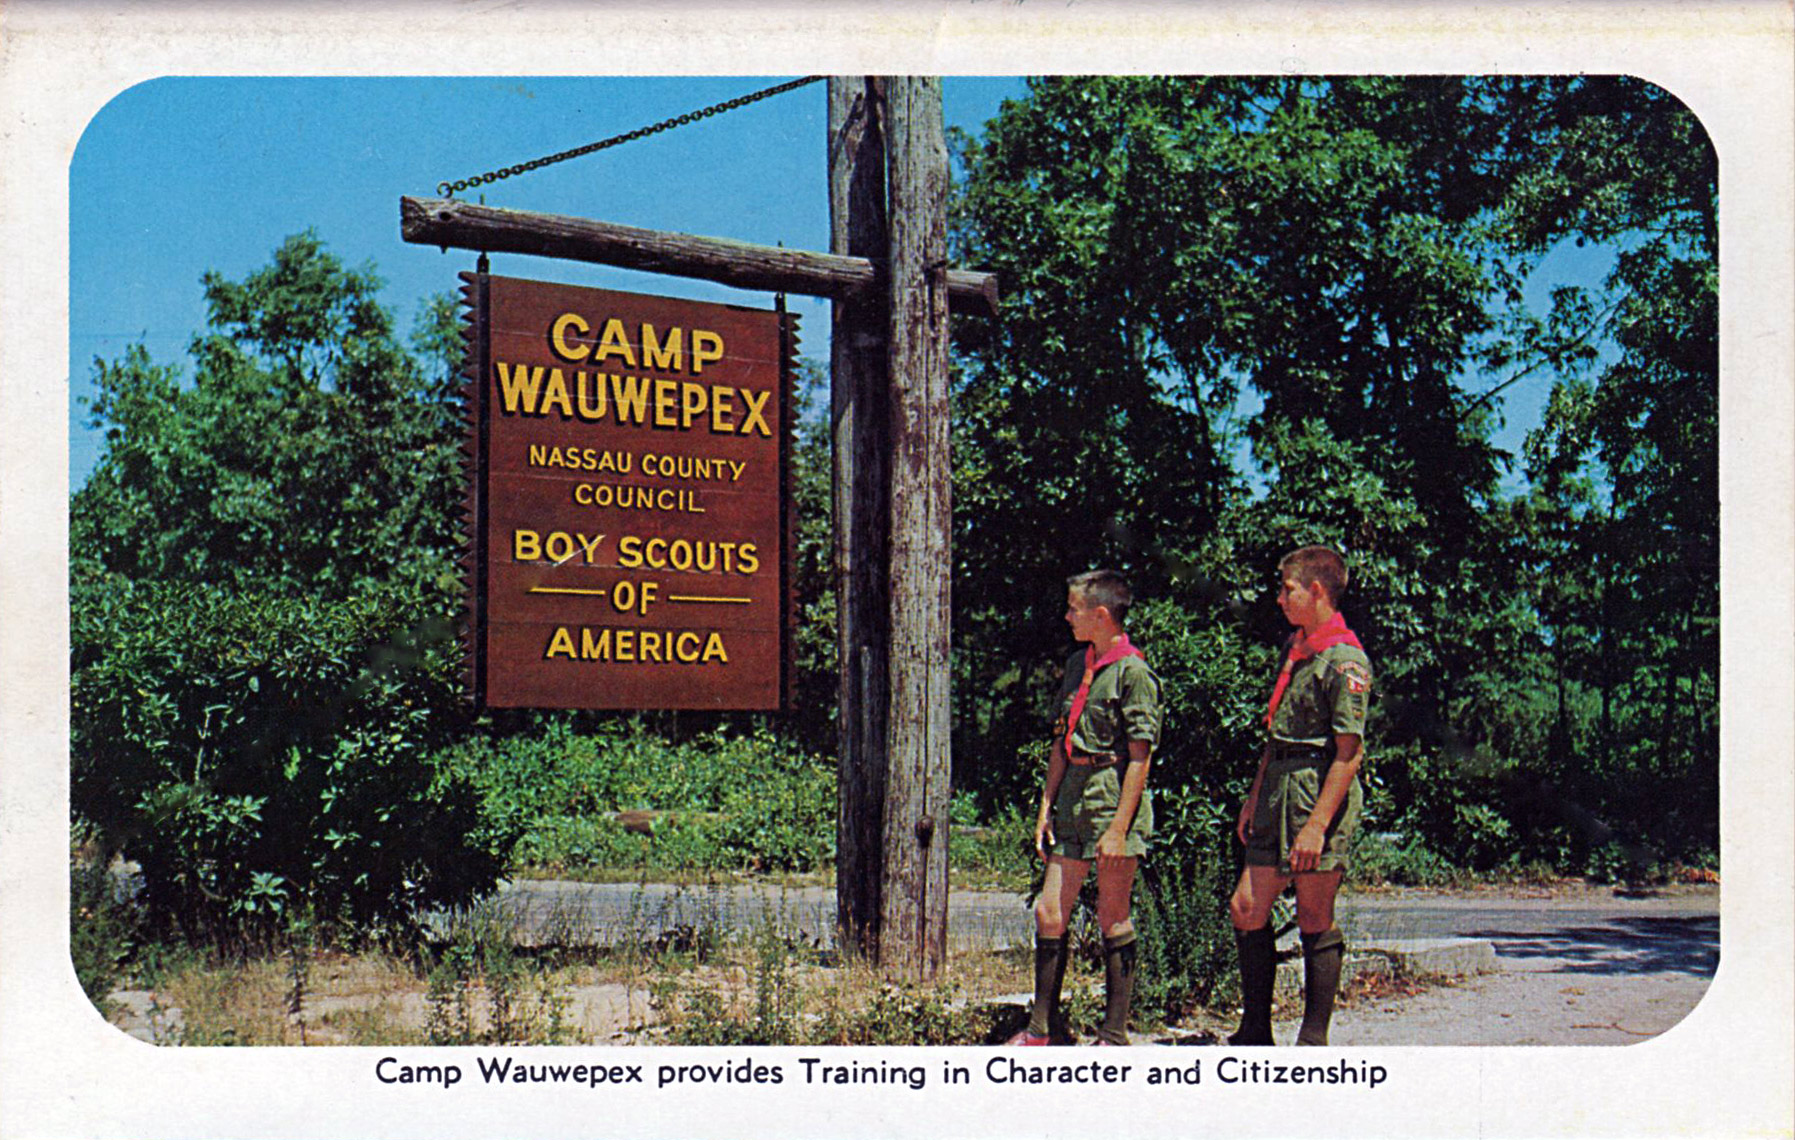 Camp Wauwepex provides Training in Character and Citizenship